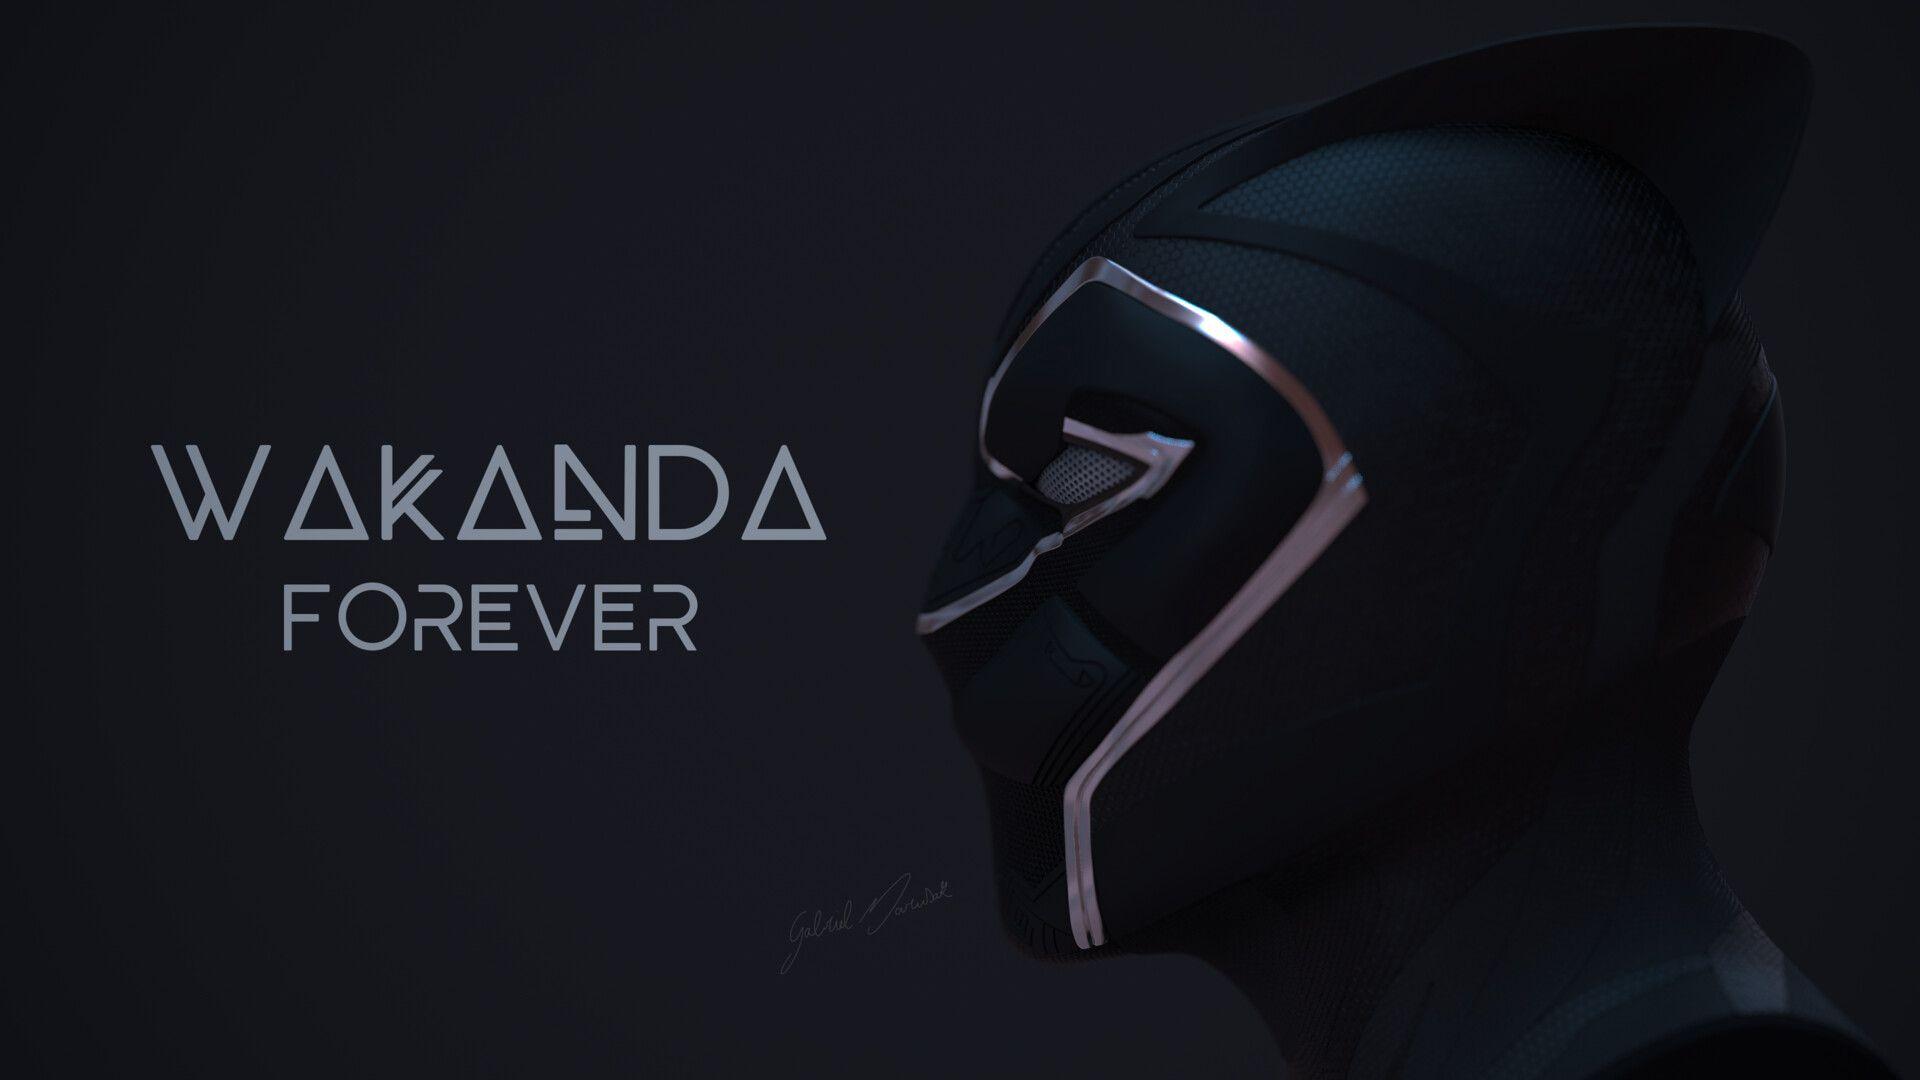 Black Panther: Wakanda Forever download the last version for ios